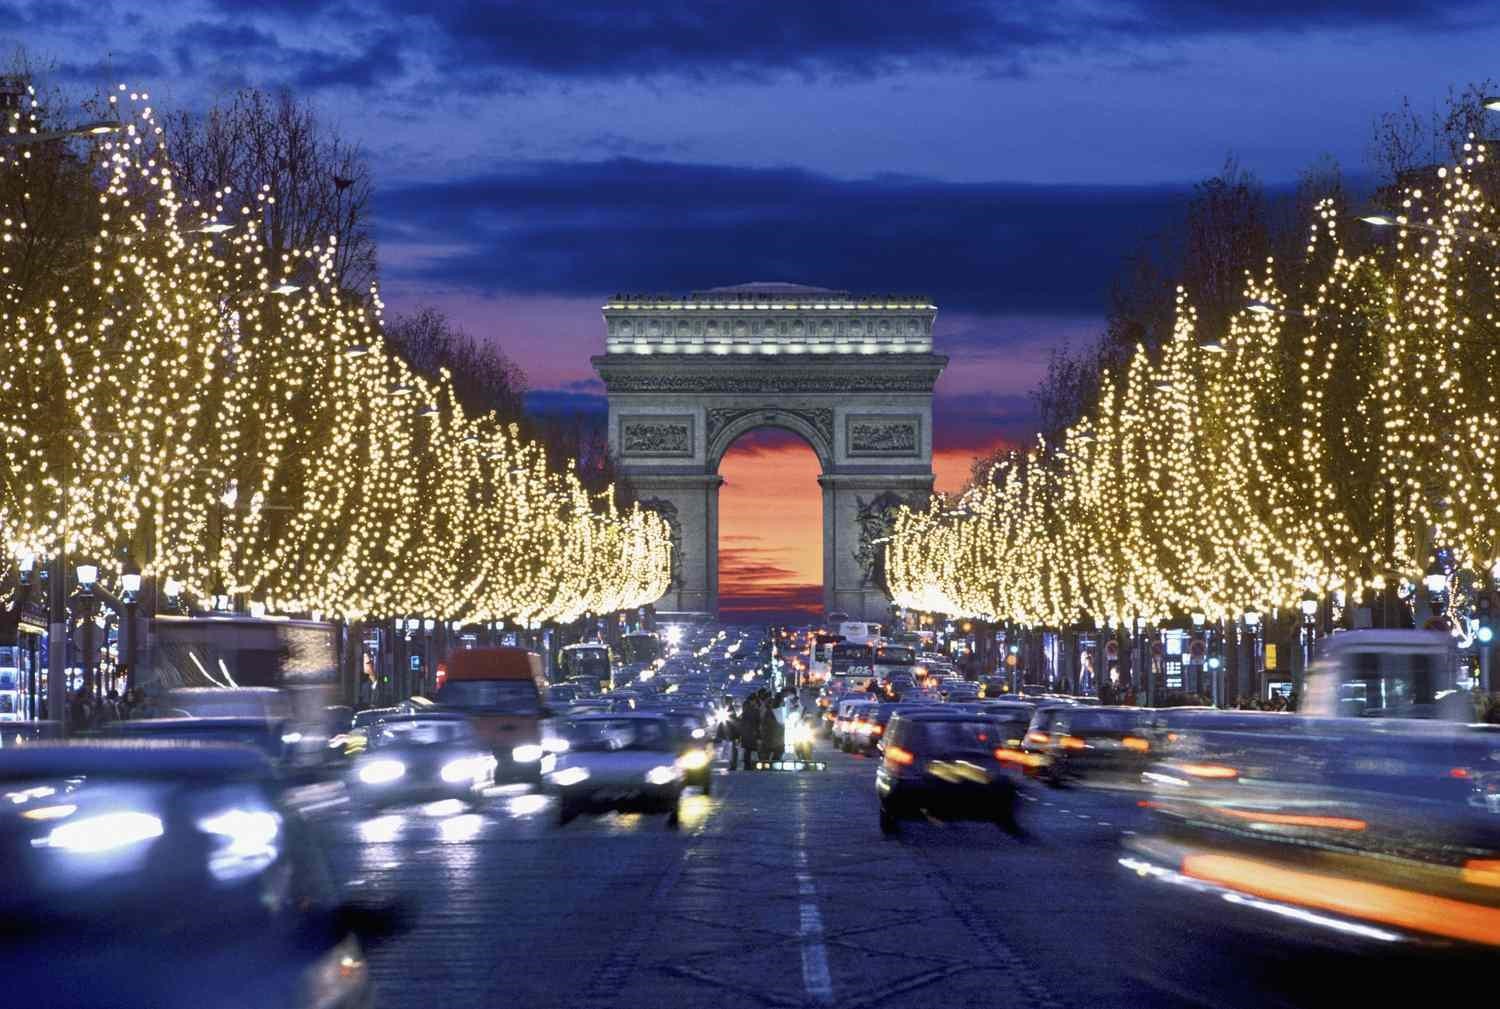 10-Reasons-Why-Paris-Should-be-the-Ultimate-Holiday-Season-Destination